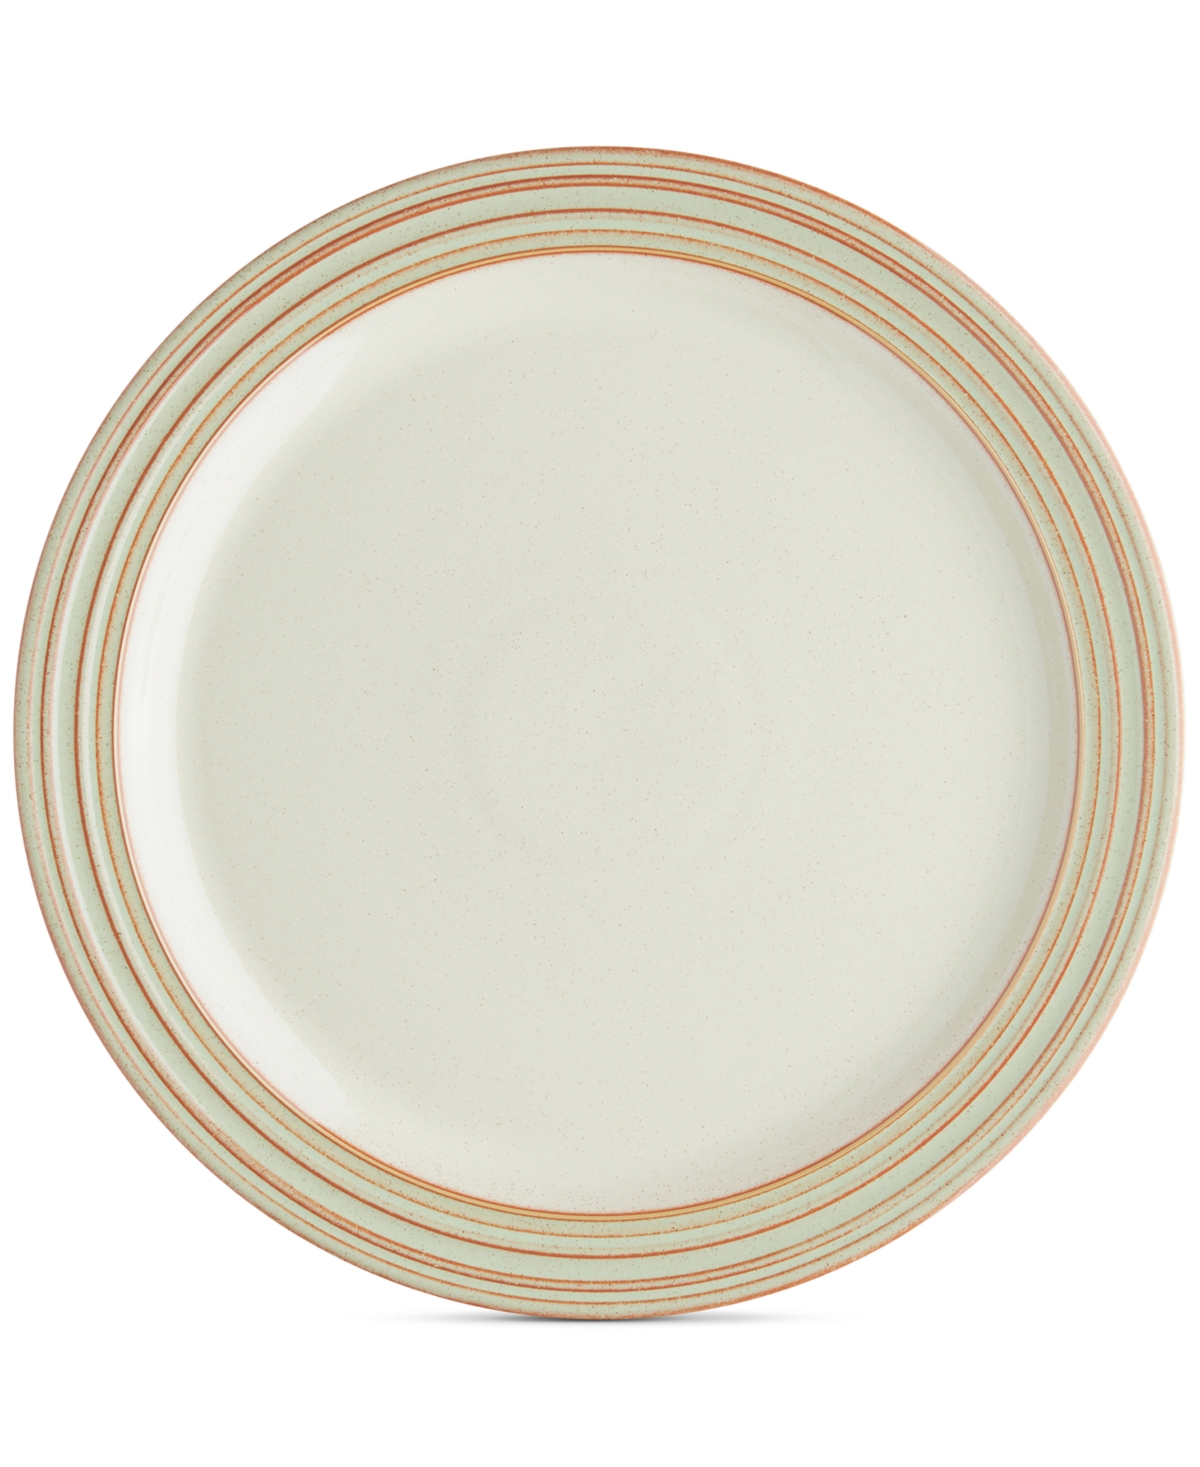 Heritage Orchard Dinner Plate - Orchard